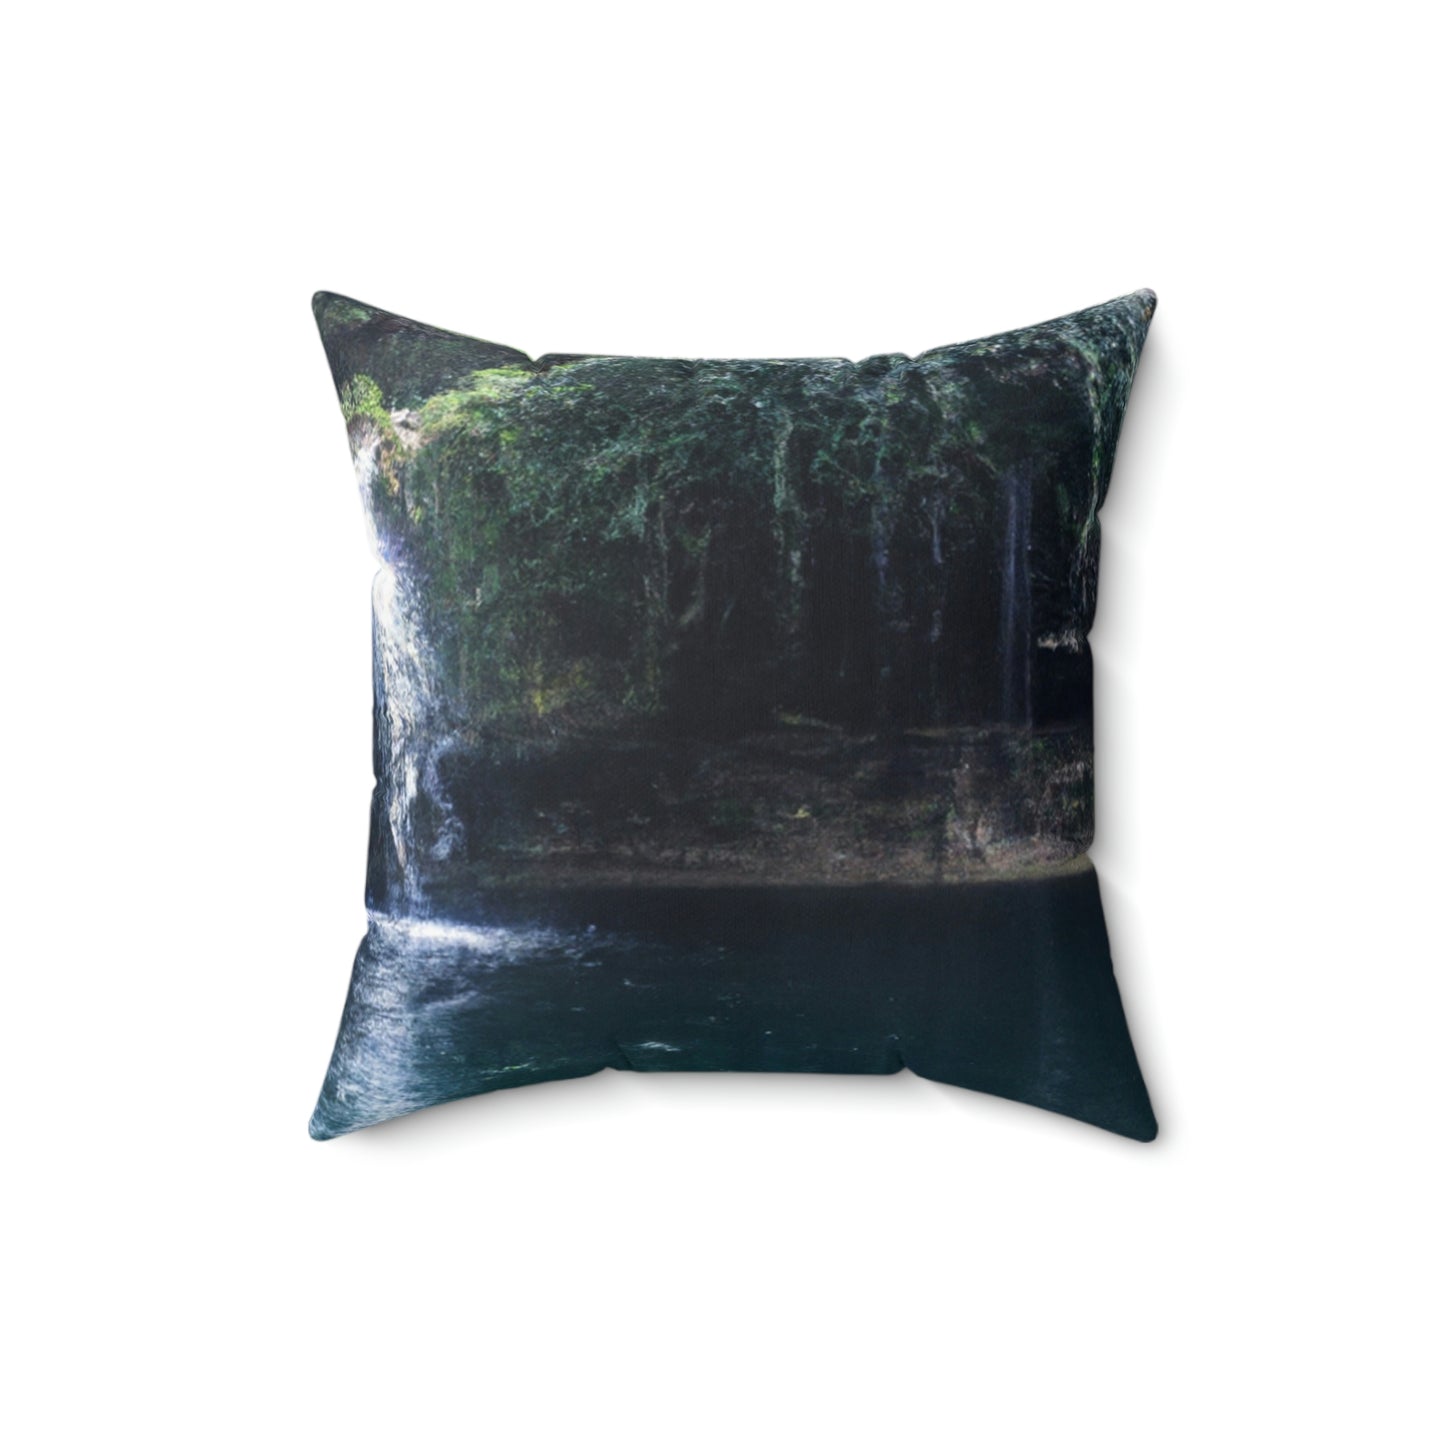 "The Oasis of Redemption" - The Alien Square Pillow